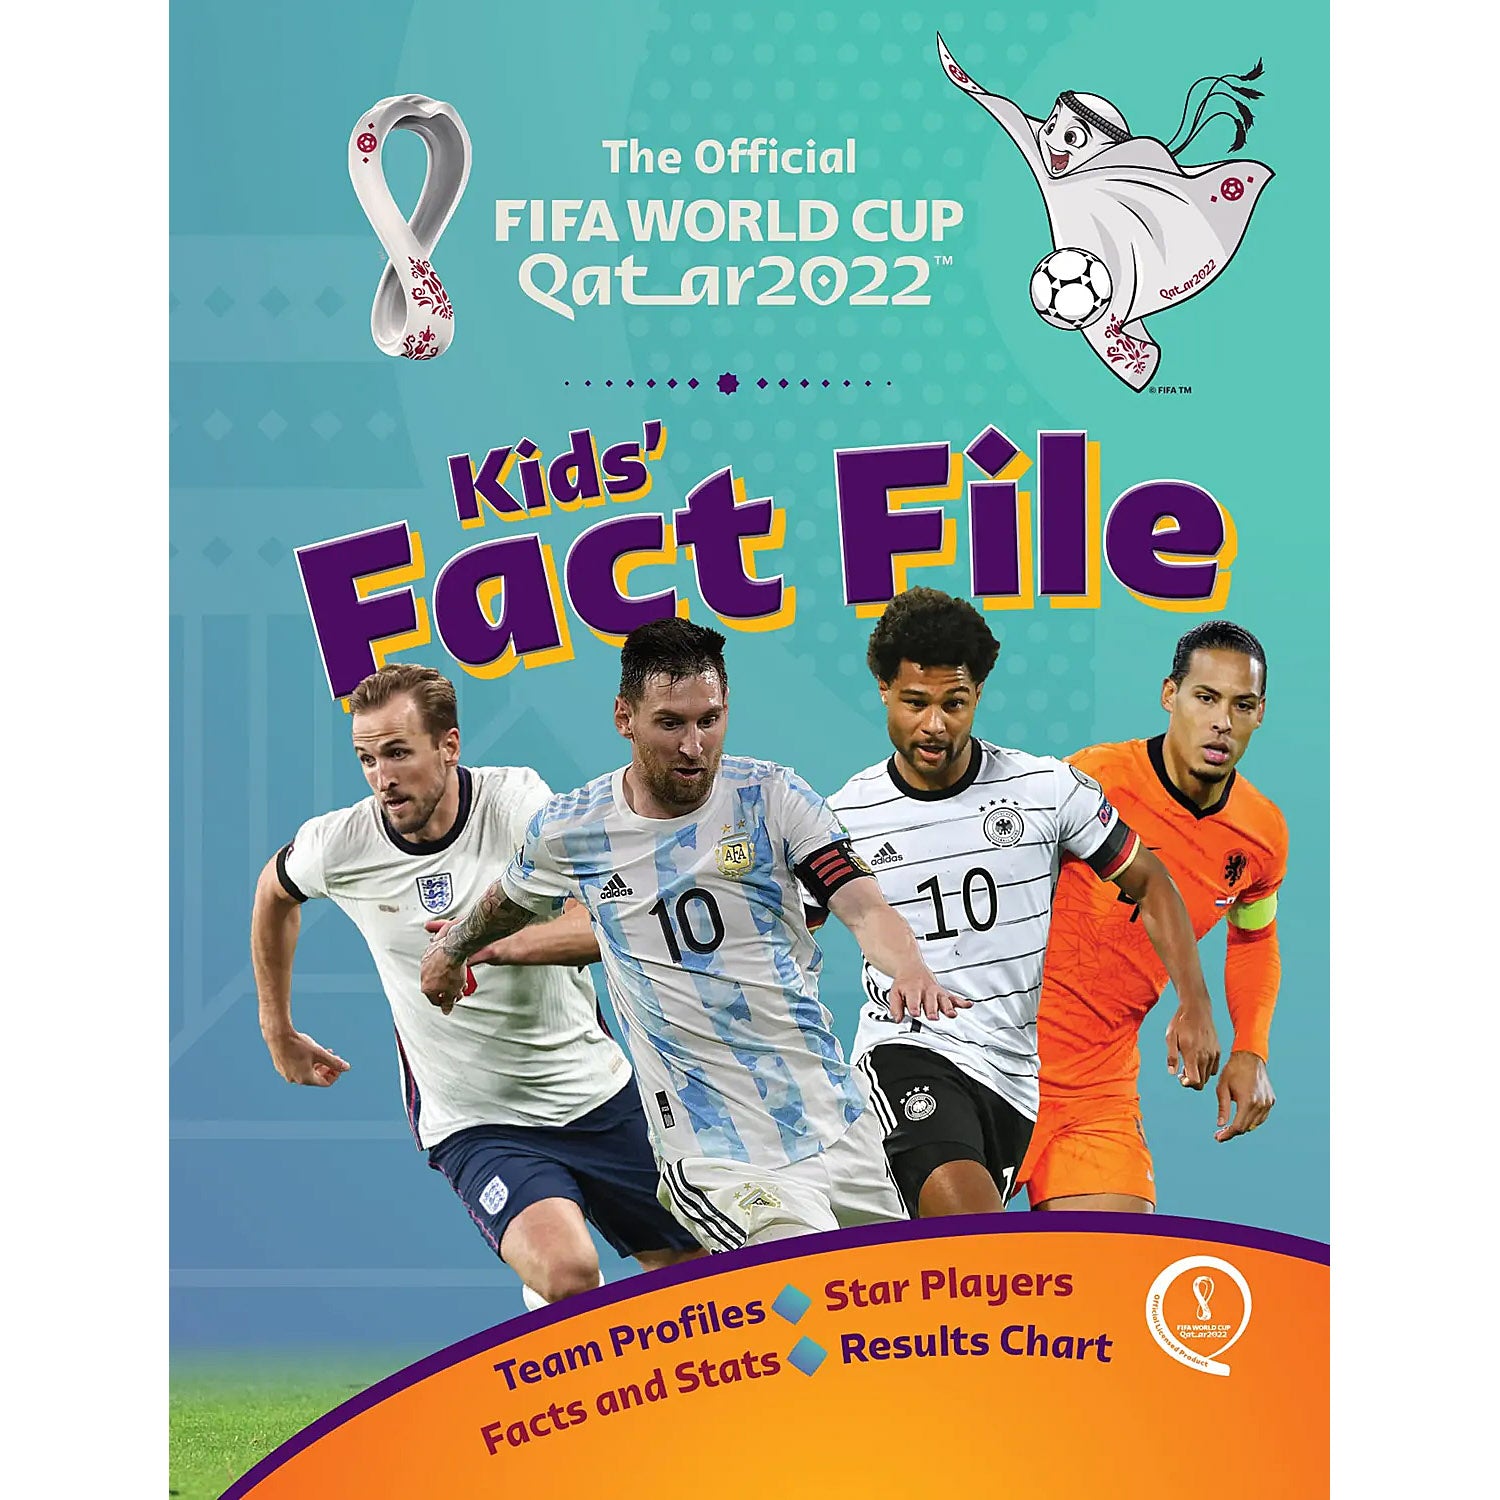 The Official FIFA World Cup 2022 Qatar Kids' Fact File